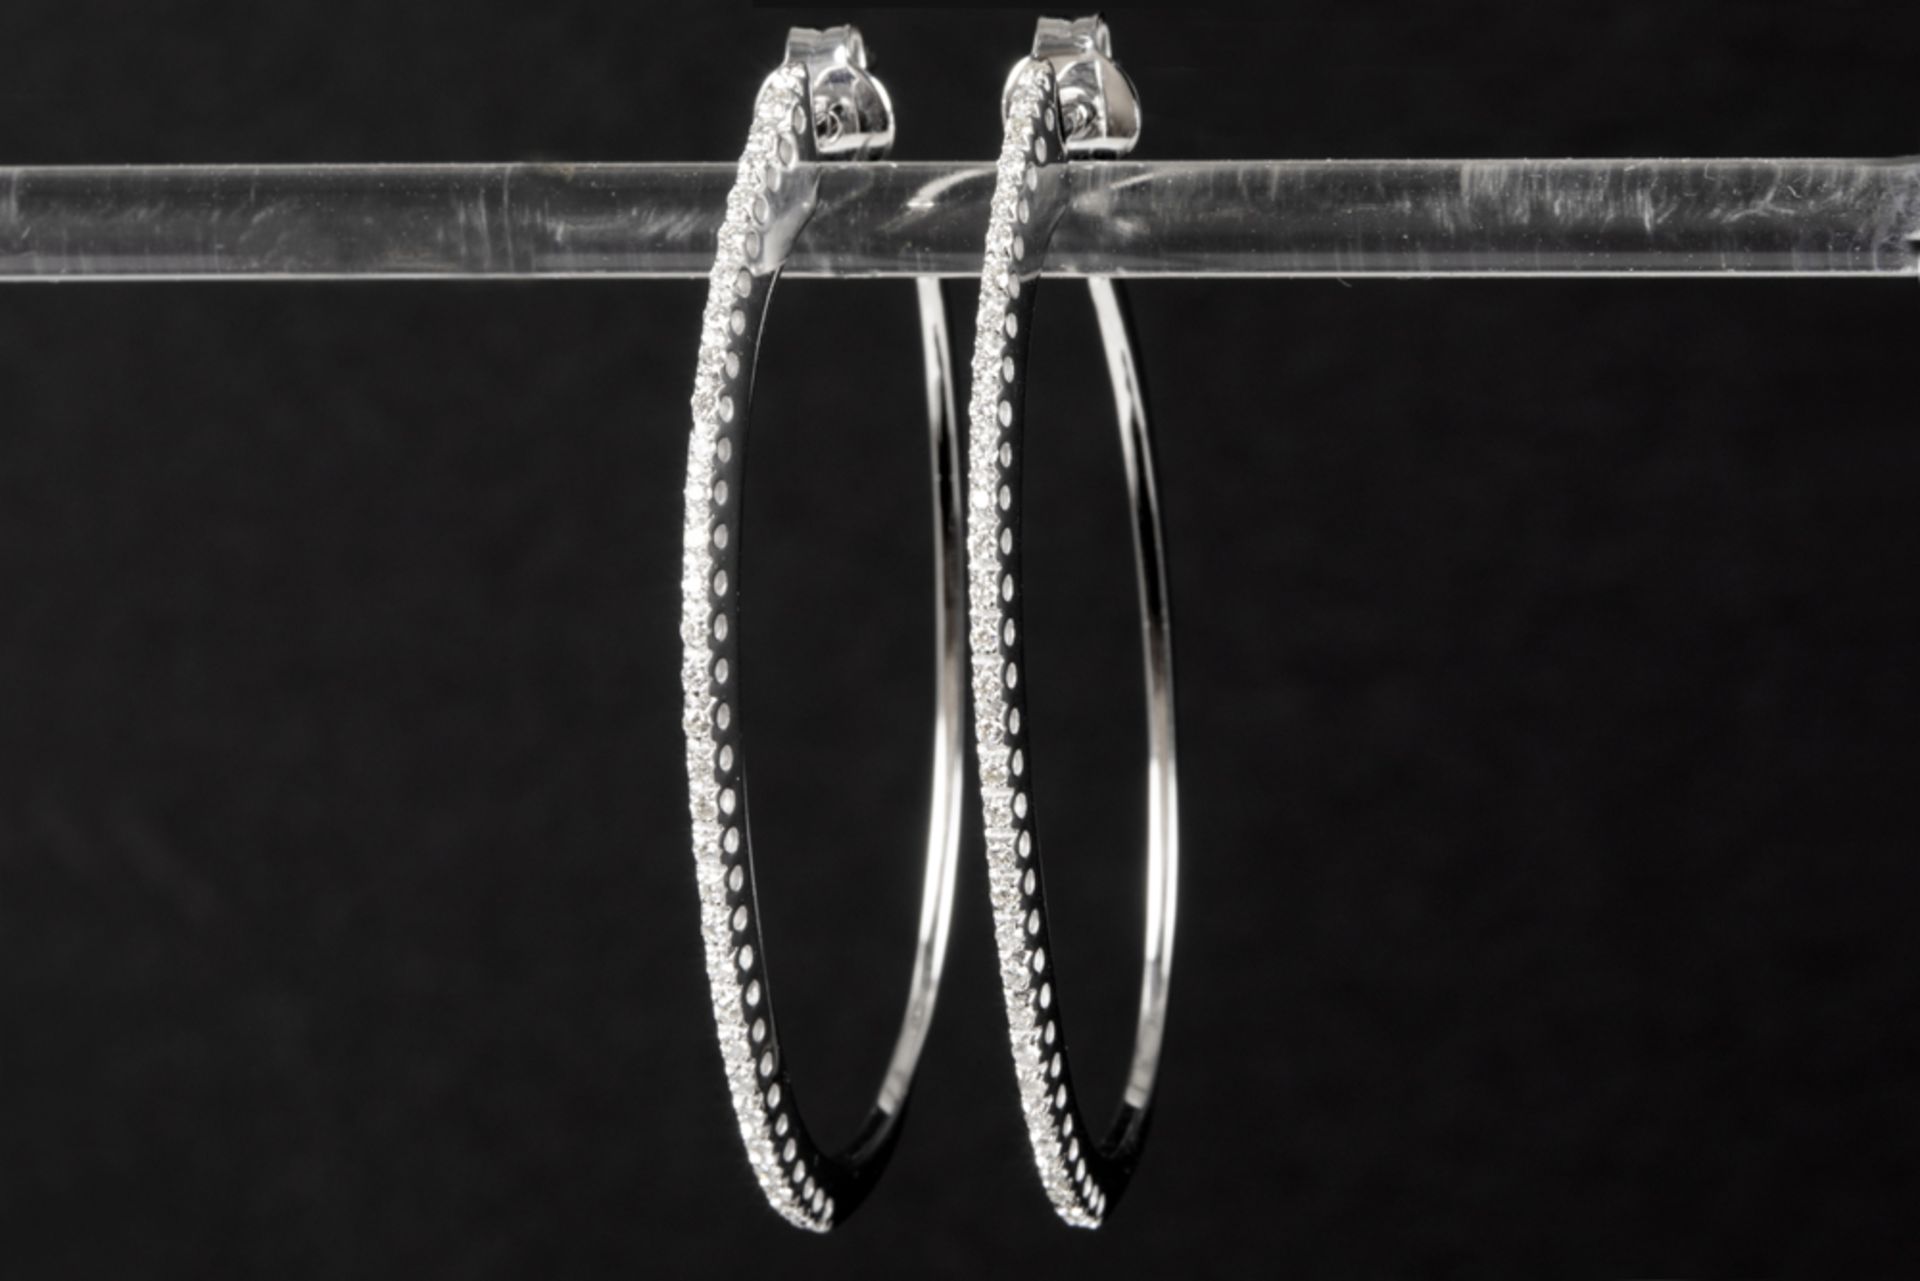 pair of earrings in white gold (18 carat) with ca 0,35 carat of high quality brilliant cut